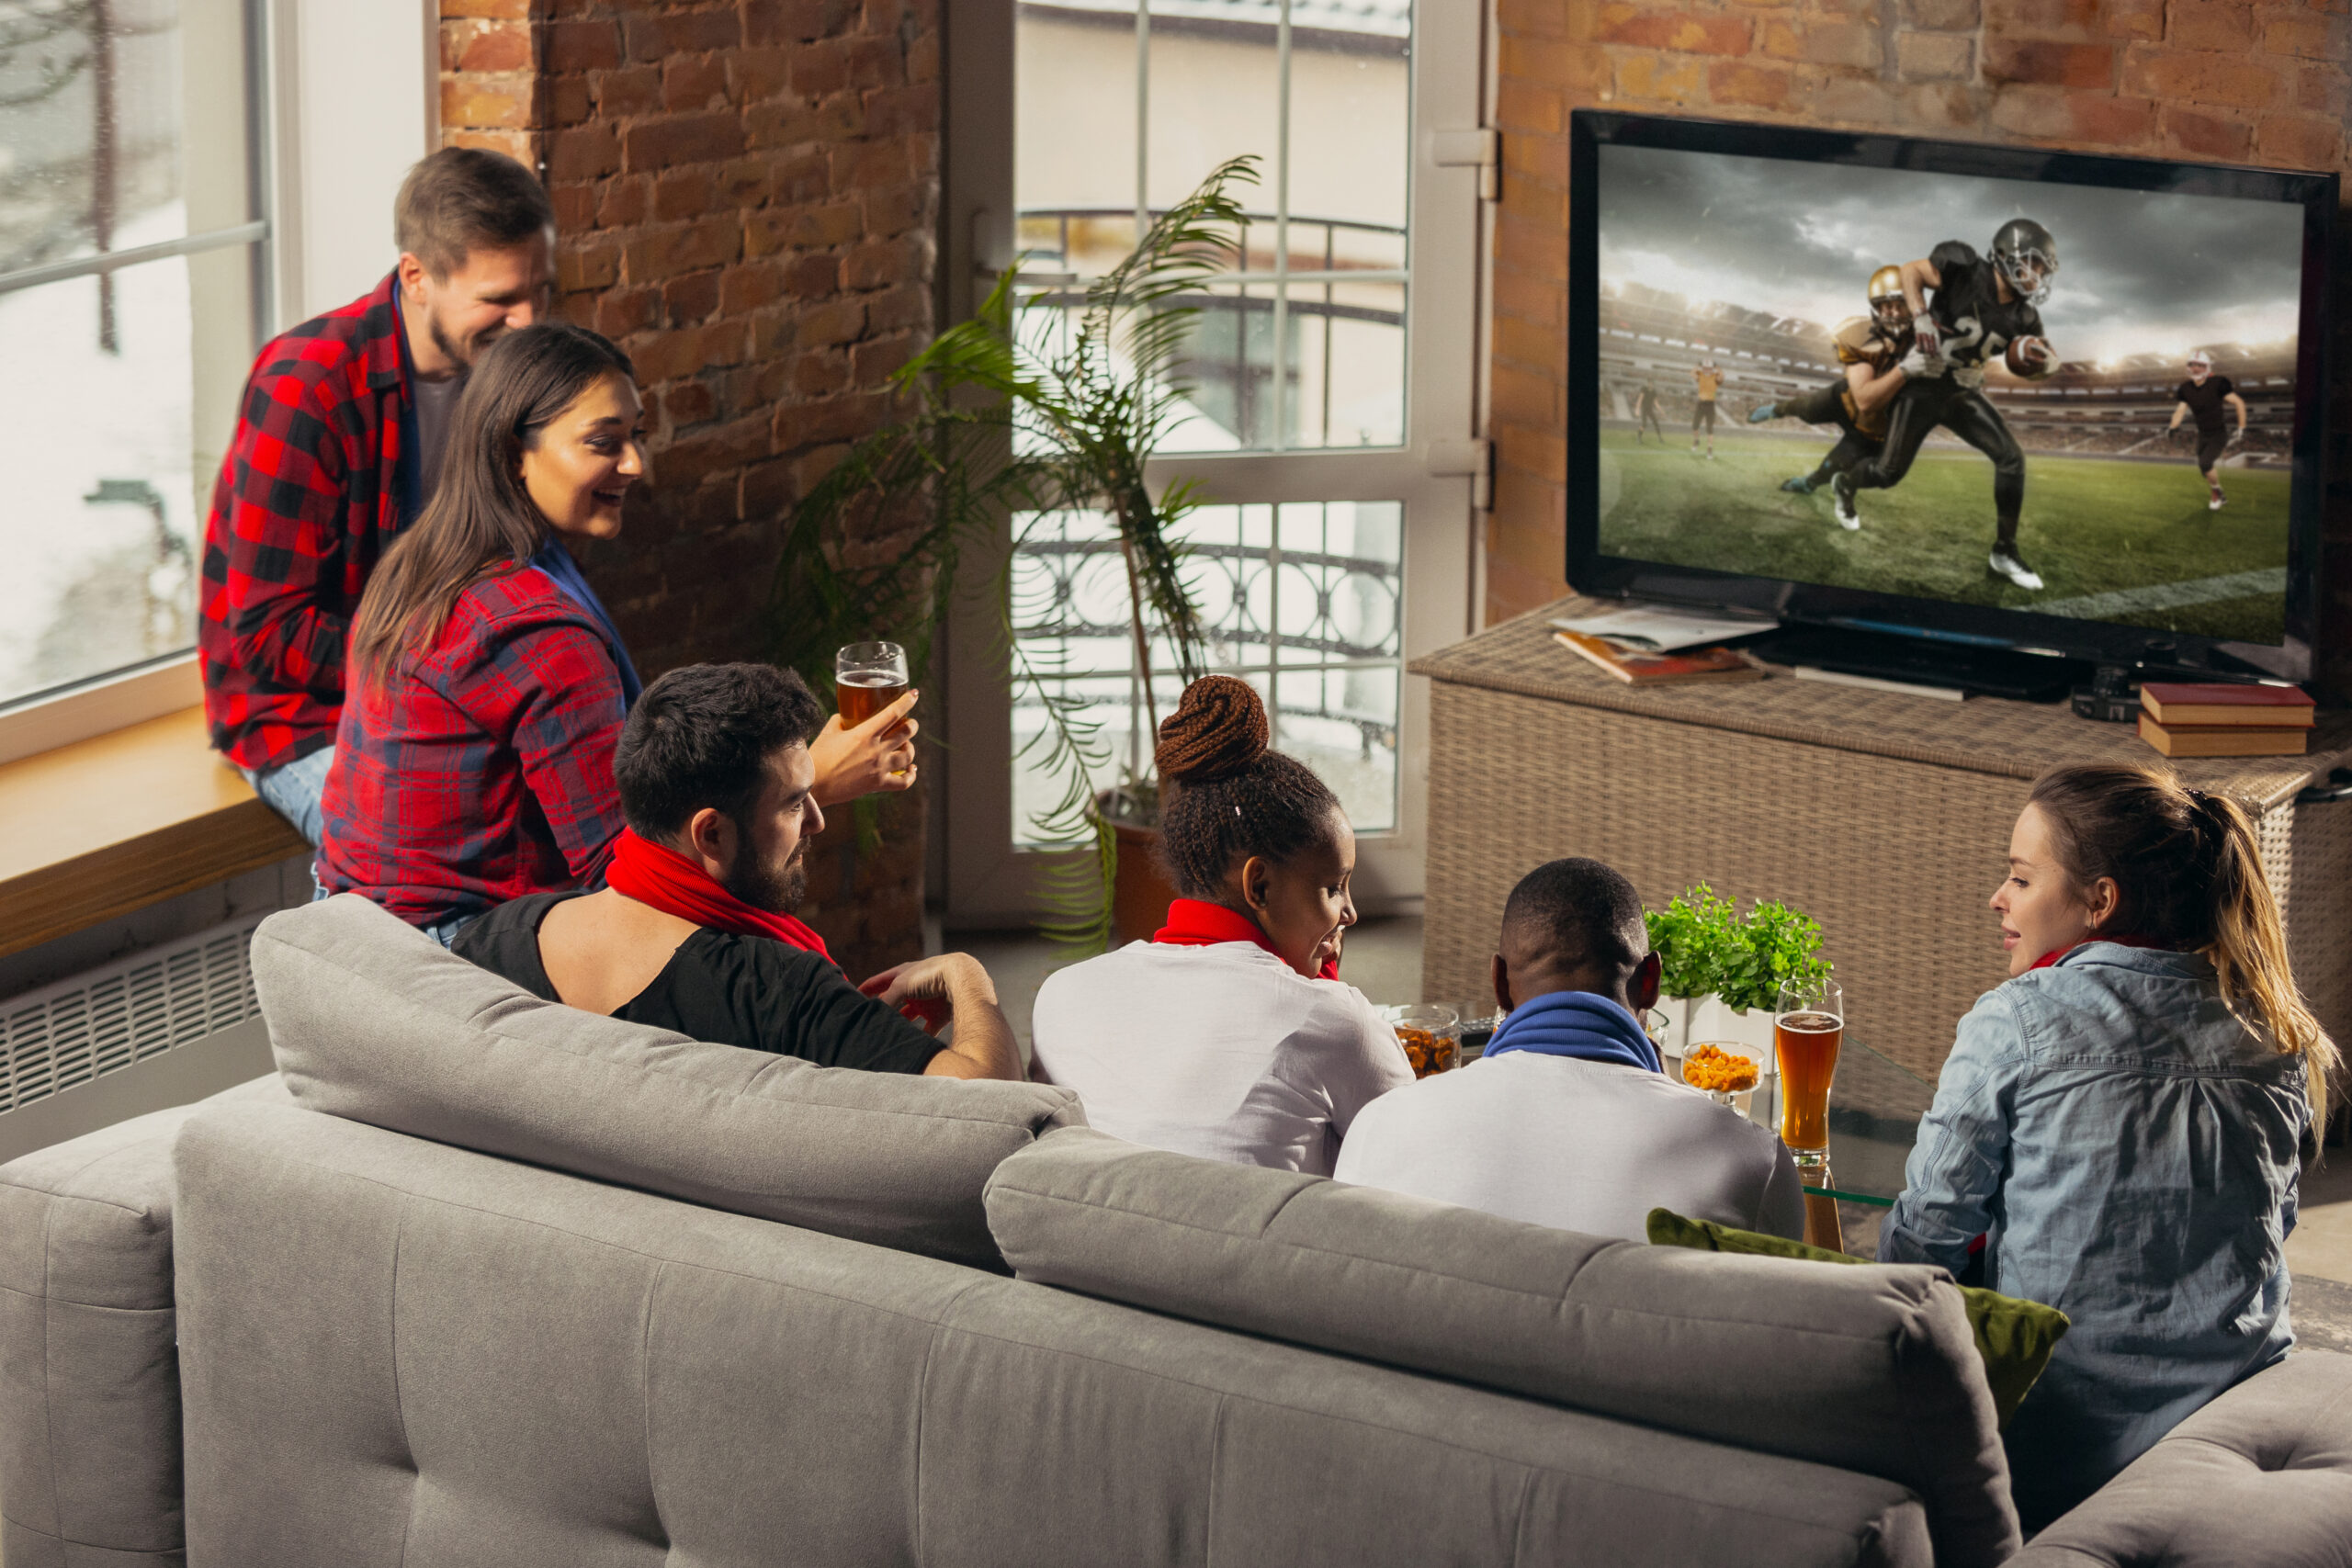 Excited group of people watching american football, sport match at home. Multiethnic group of emotional friend, fans cheering for favourite national team, drinking beer. Concept of emotions, support.